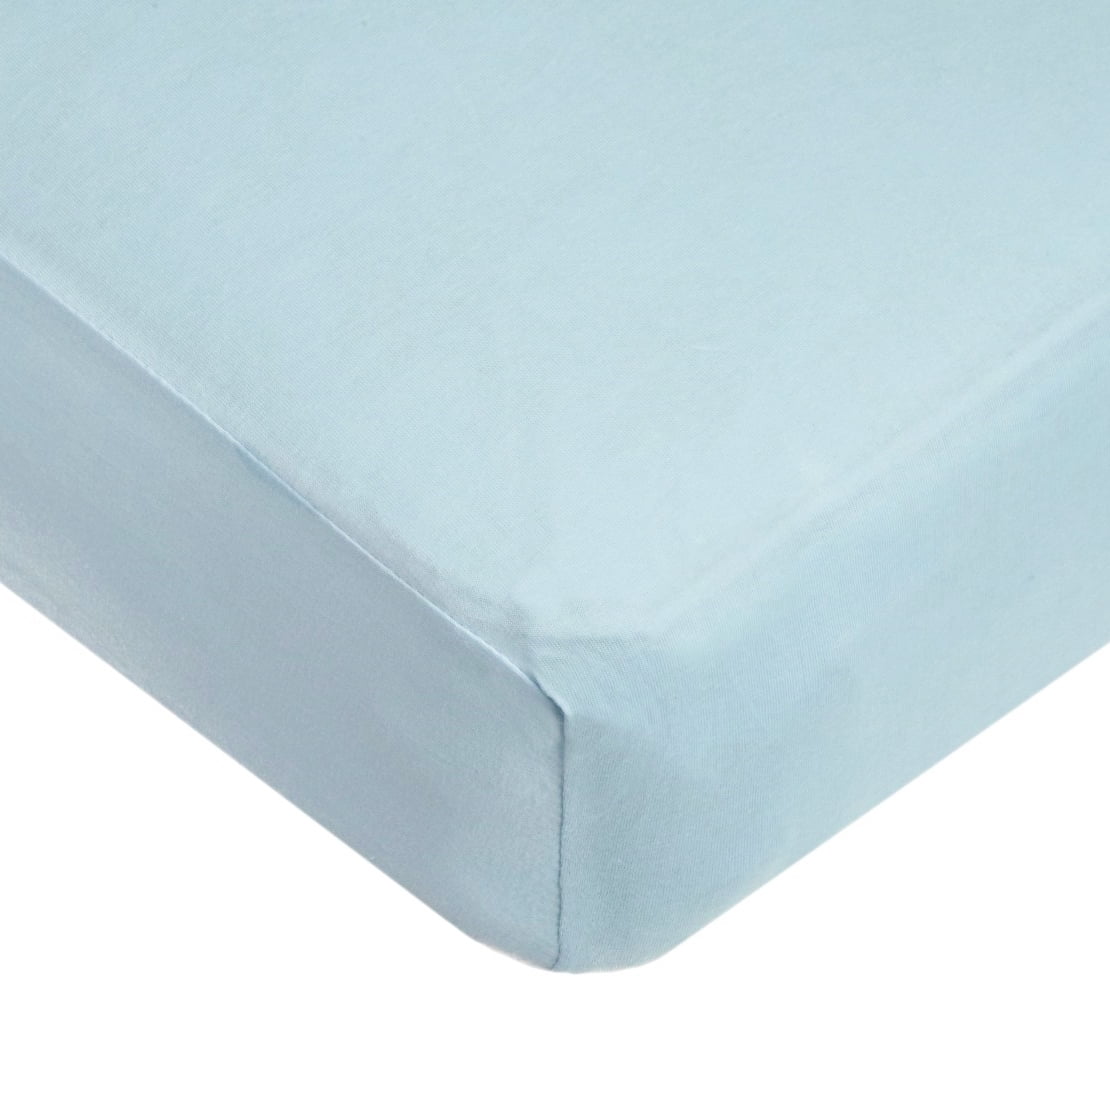 LUXURY Jersey/Terry Towelling Fitted SHEET NURSERY BEDDING Cot/Cot Bed mattress 